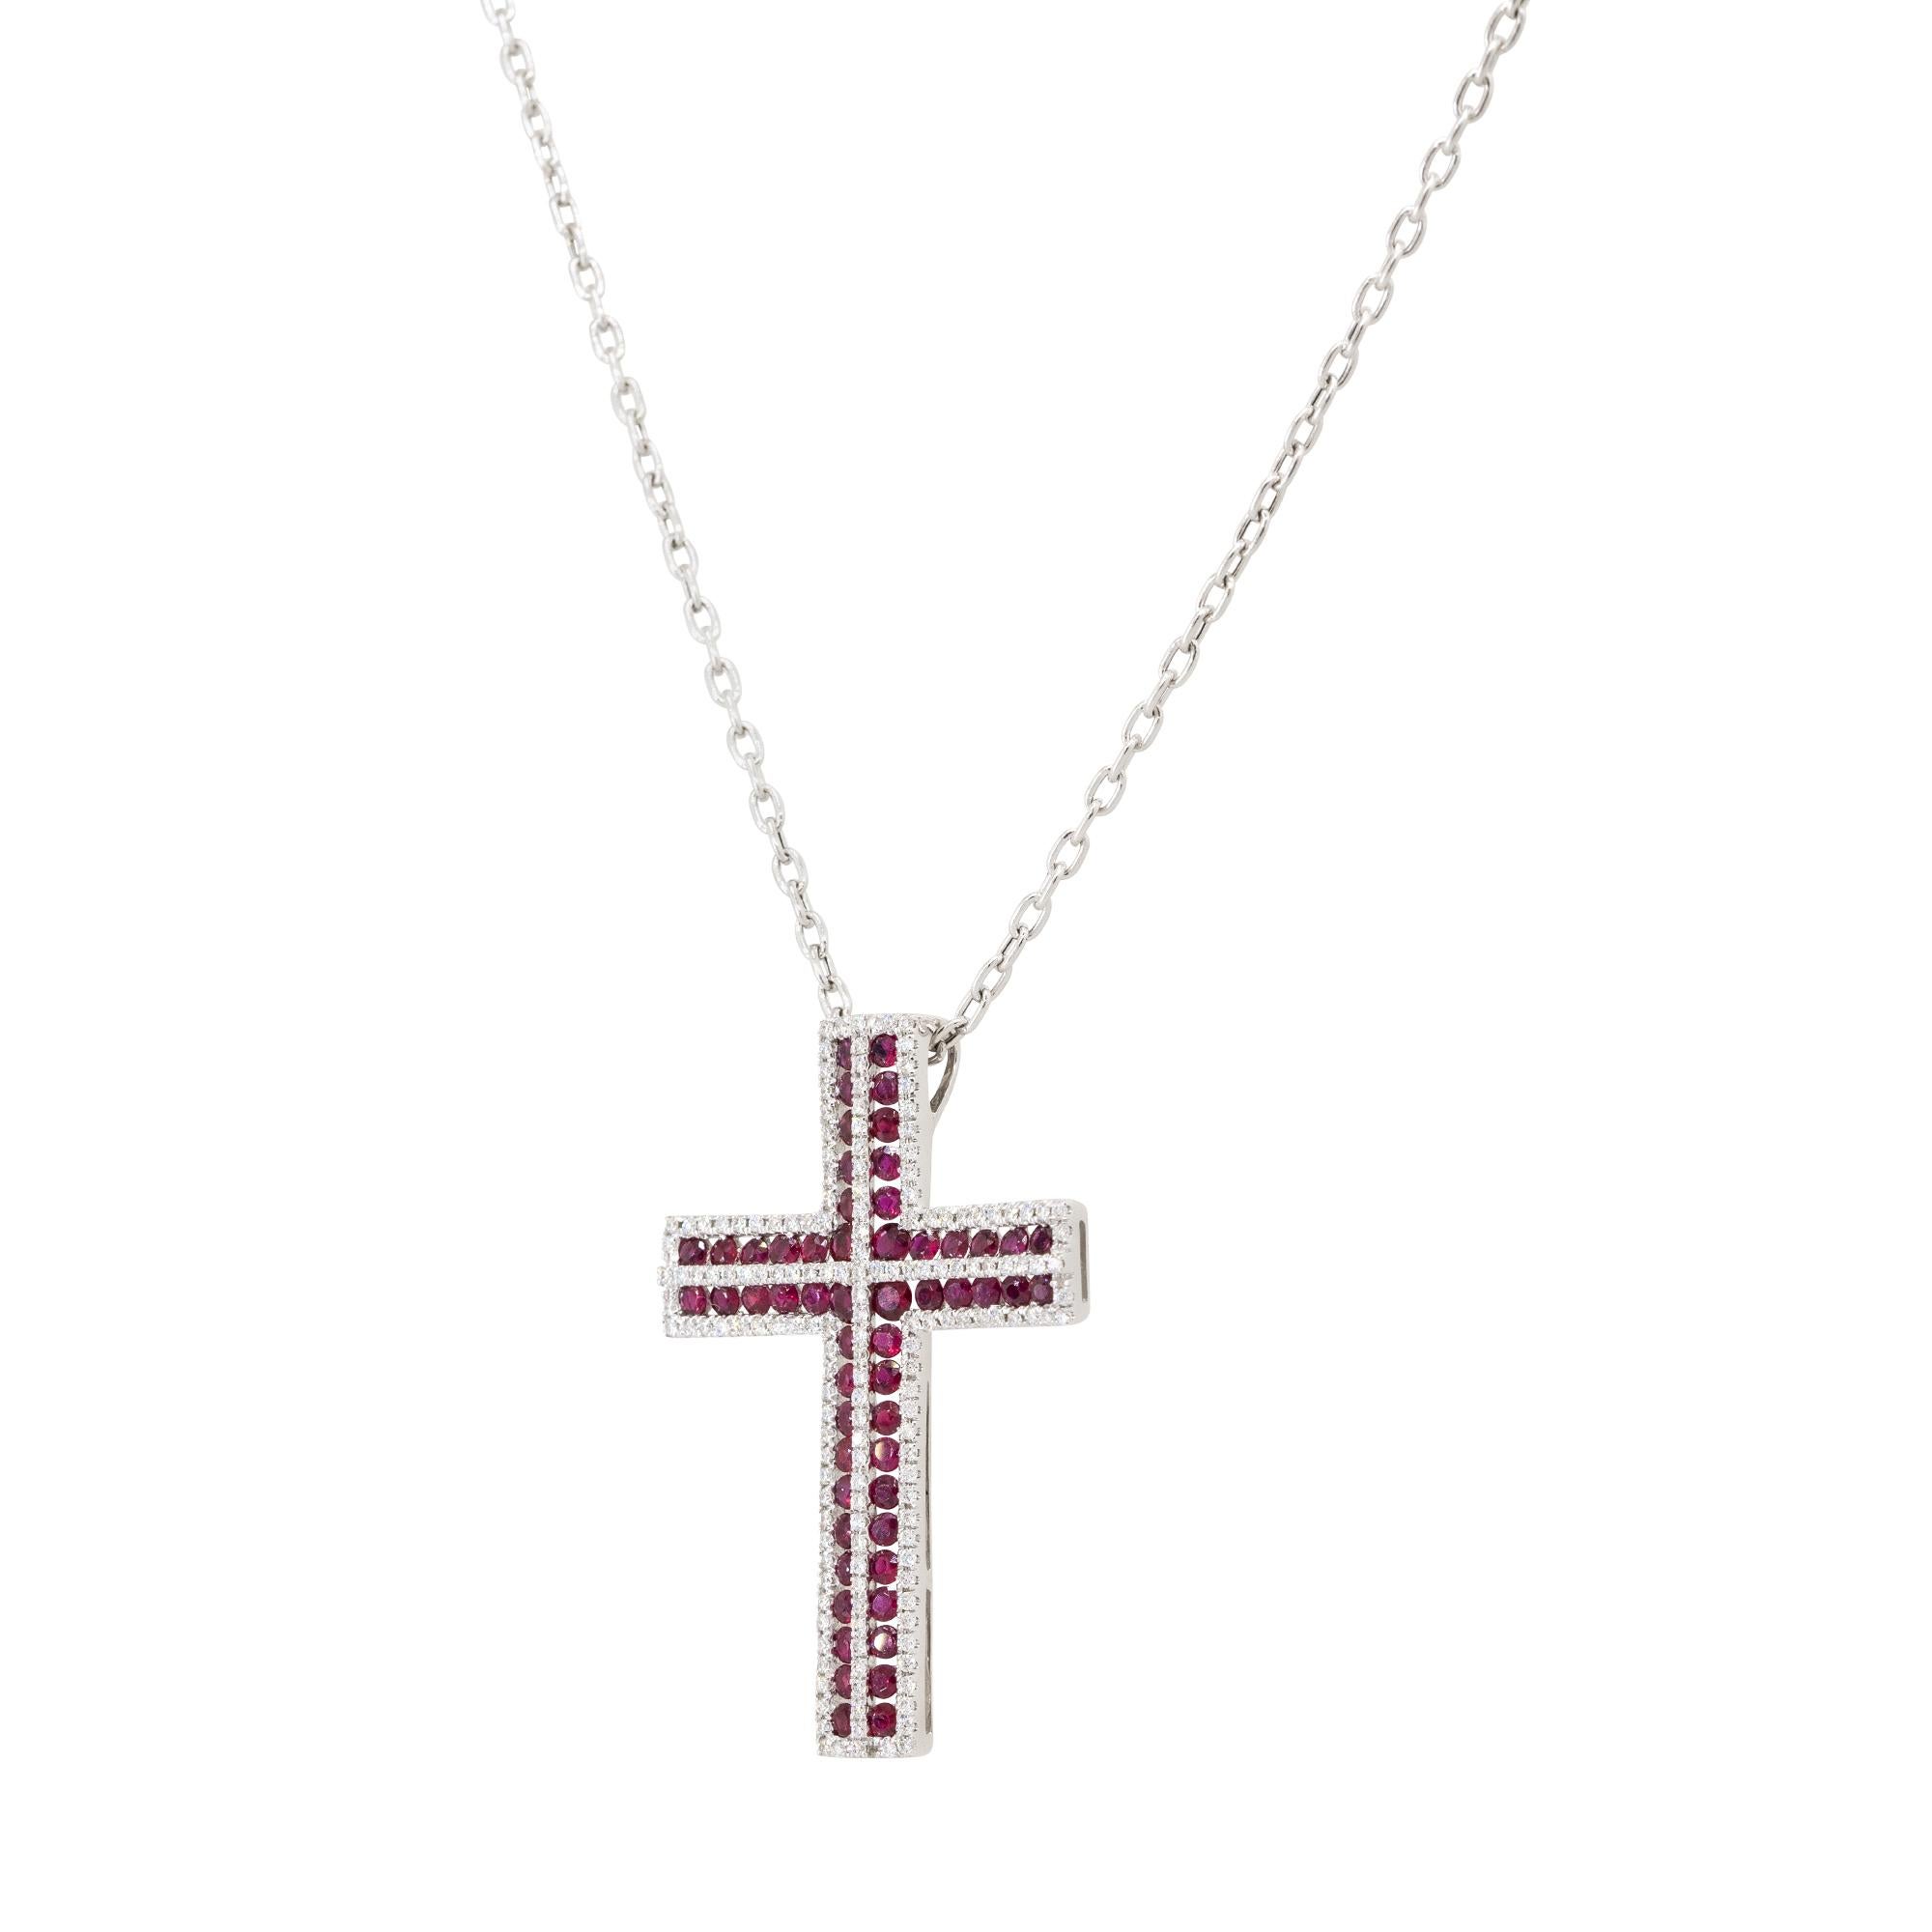 Diamond & Ruby Pave Cross Pendant Necklace 18 Karat In Stock In Excellent Condition For Sale In Boca Raton, FL